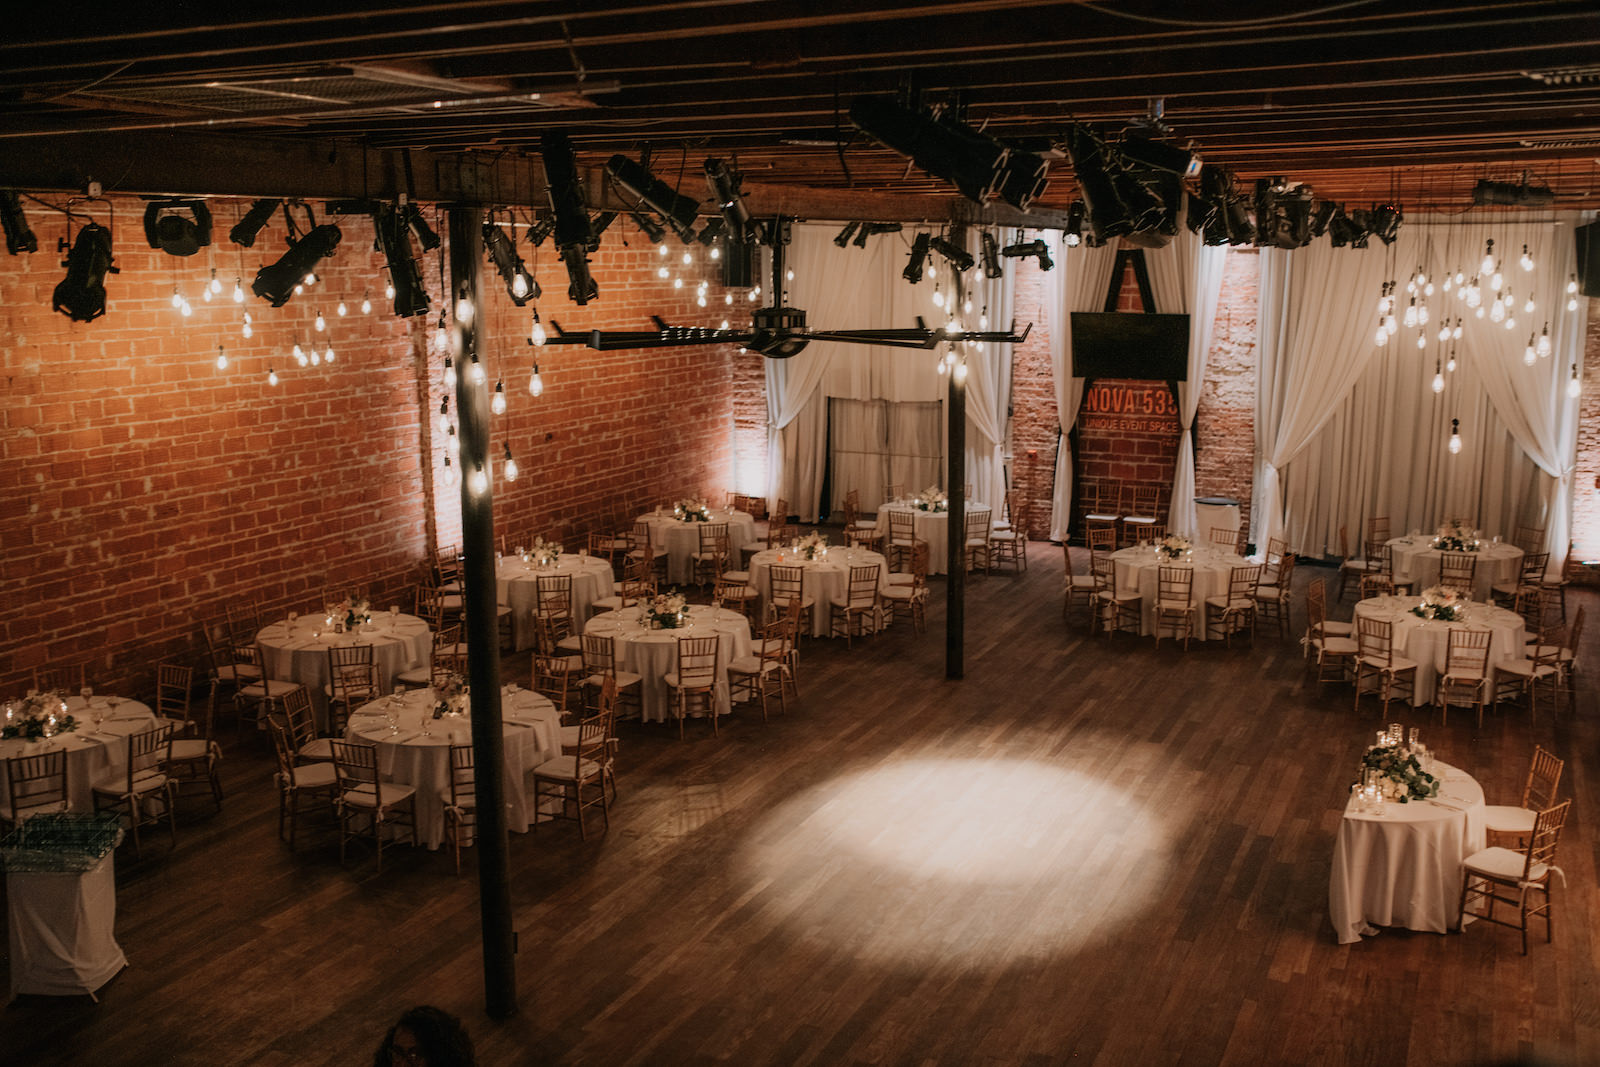 Elegant Florida Wedding Reception and Decor, Round Tables with White Linens and Gold Chiavari Chairs, Historic Brazilian Hardwood Floors, Vintage String Lighting, and Exposed Red Brick Wall | Tampa Bay Unique Wedding Venue NOVA 535 | Downtown St. Petersburg Luxury Caterer Olympia Catering